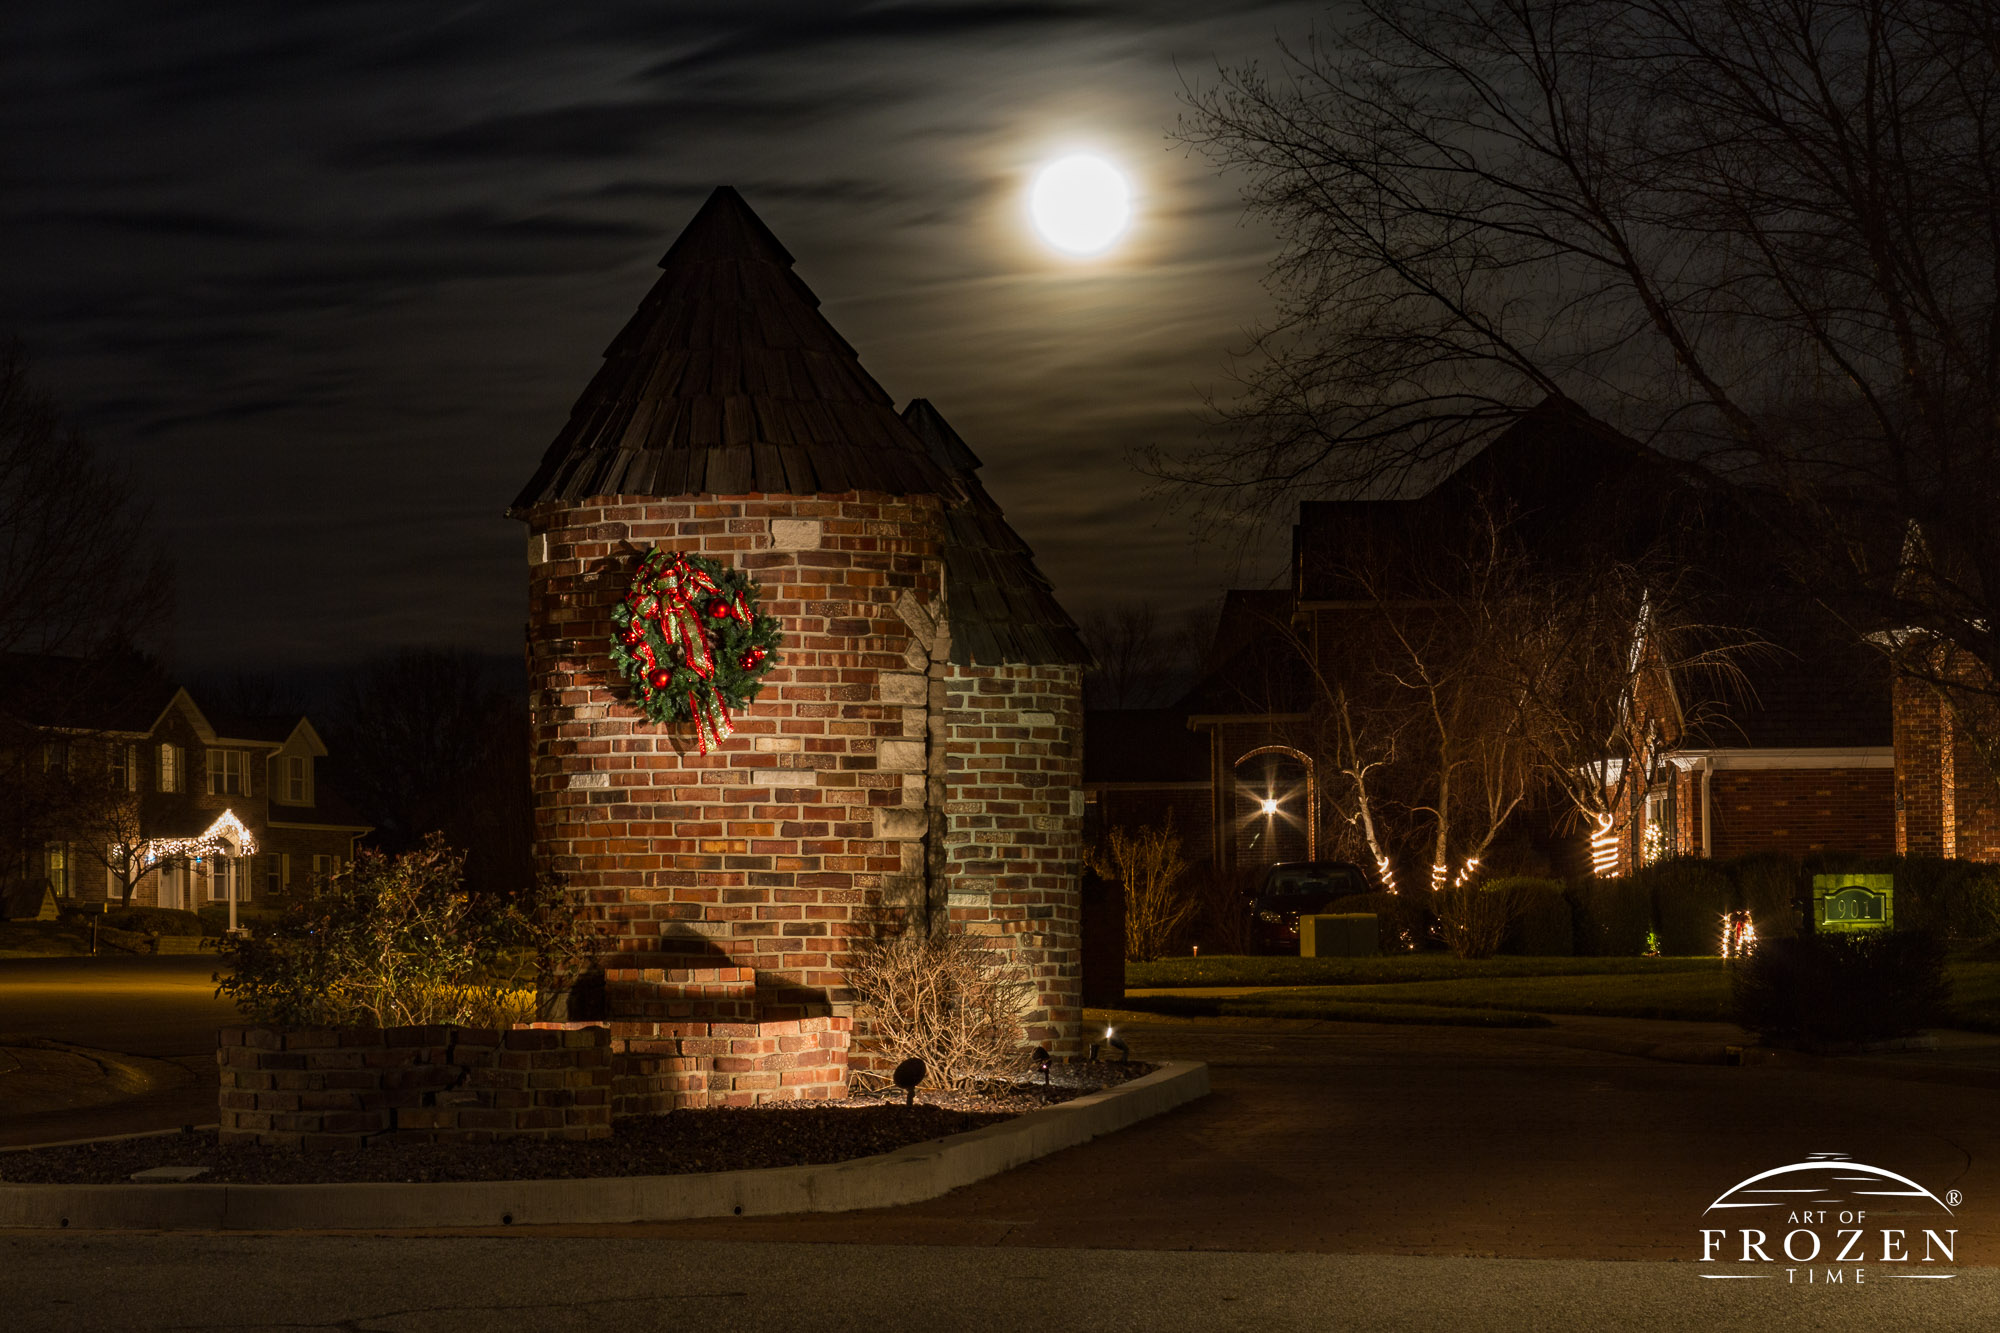 A tumbled brick monument at the entrance of an O’Fallon Illinois neighborhood where the December full moon rises over St. Clair County and landscape lights illuminate the holiday decorations.